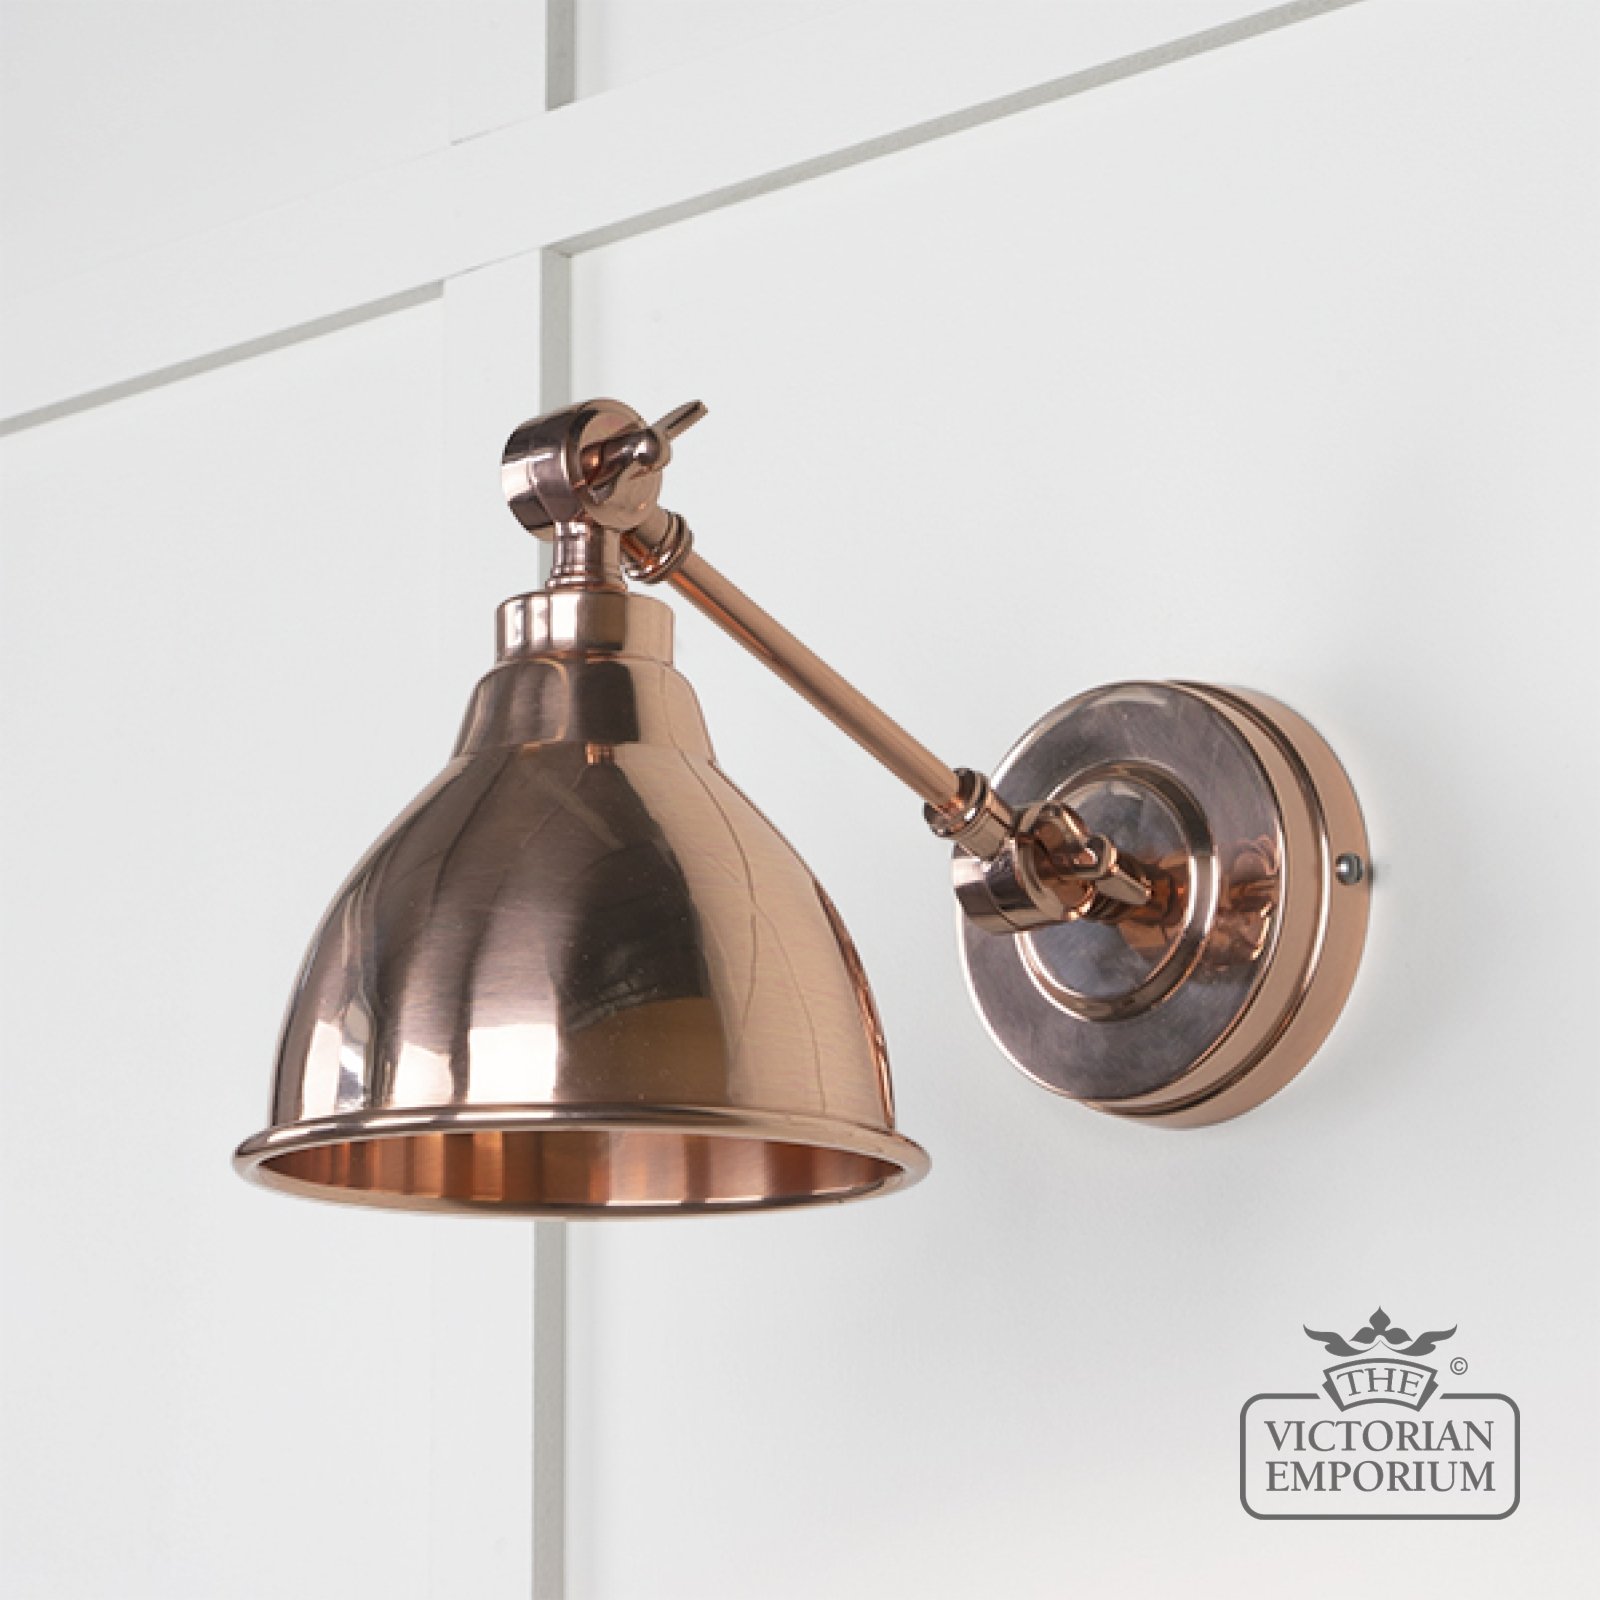 Brindle Wall Light in Smooth Copper